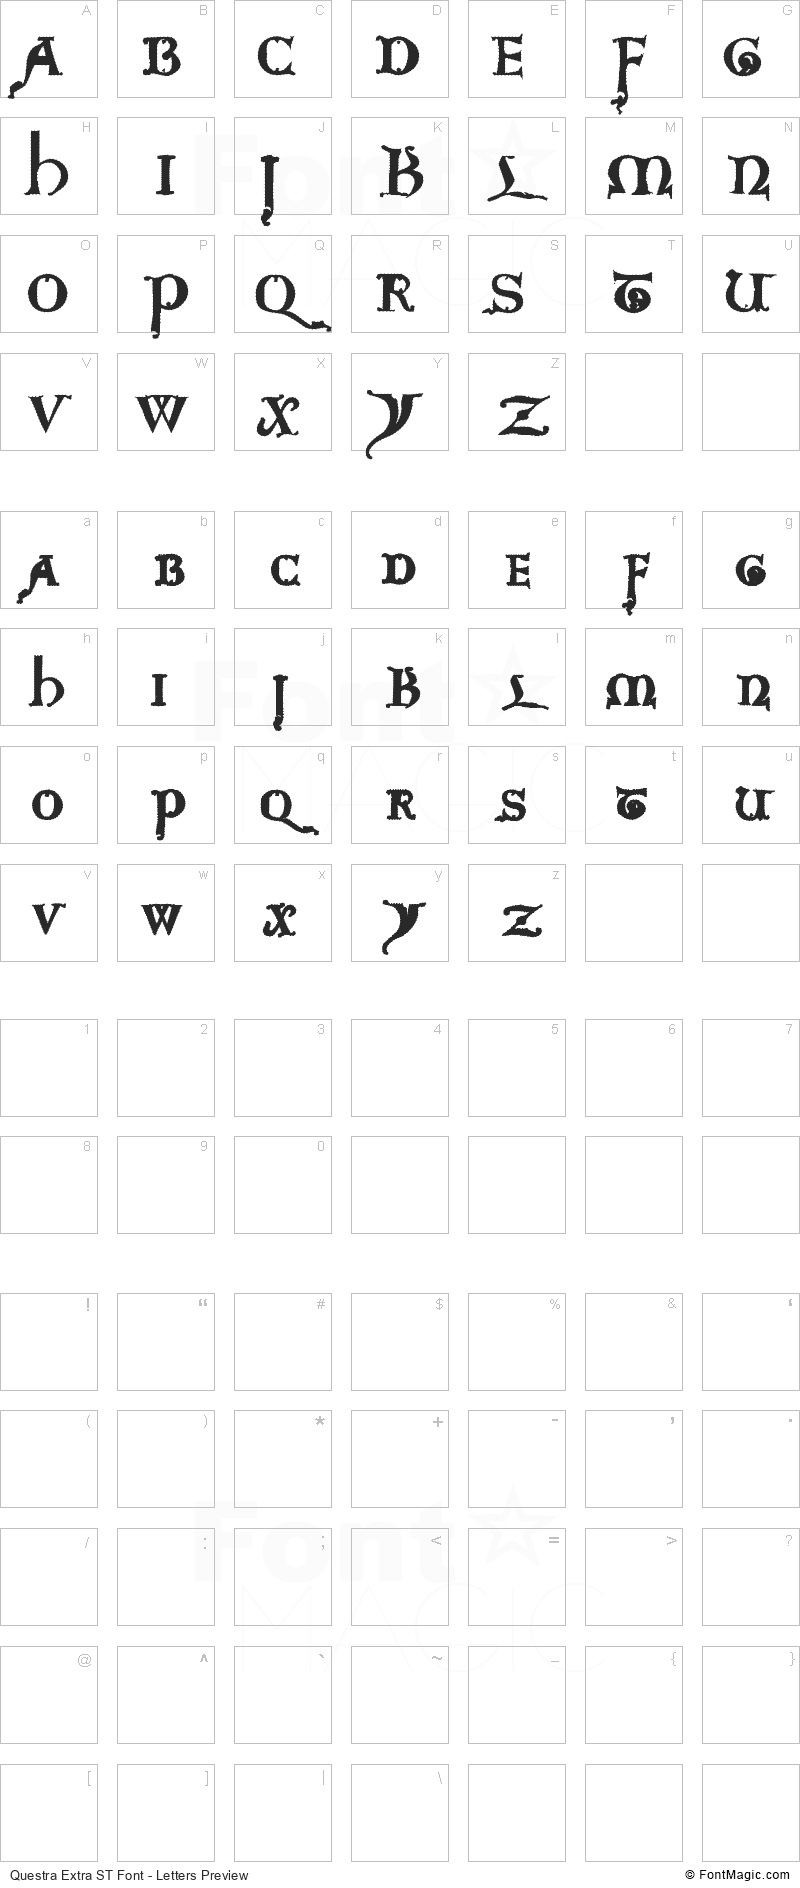 Questra Extra ST Font - All Latters Preview Chart